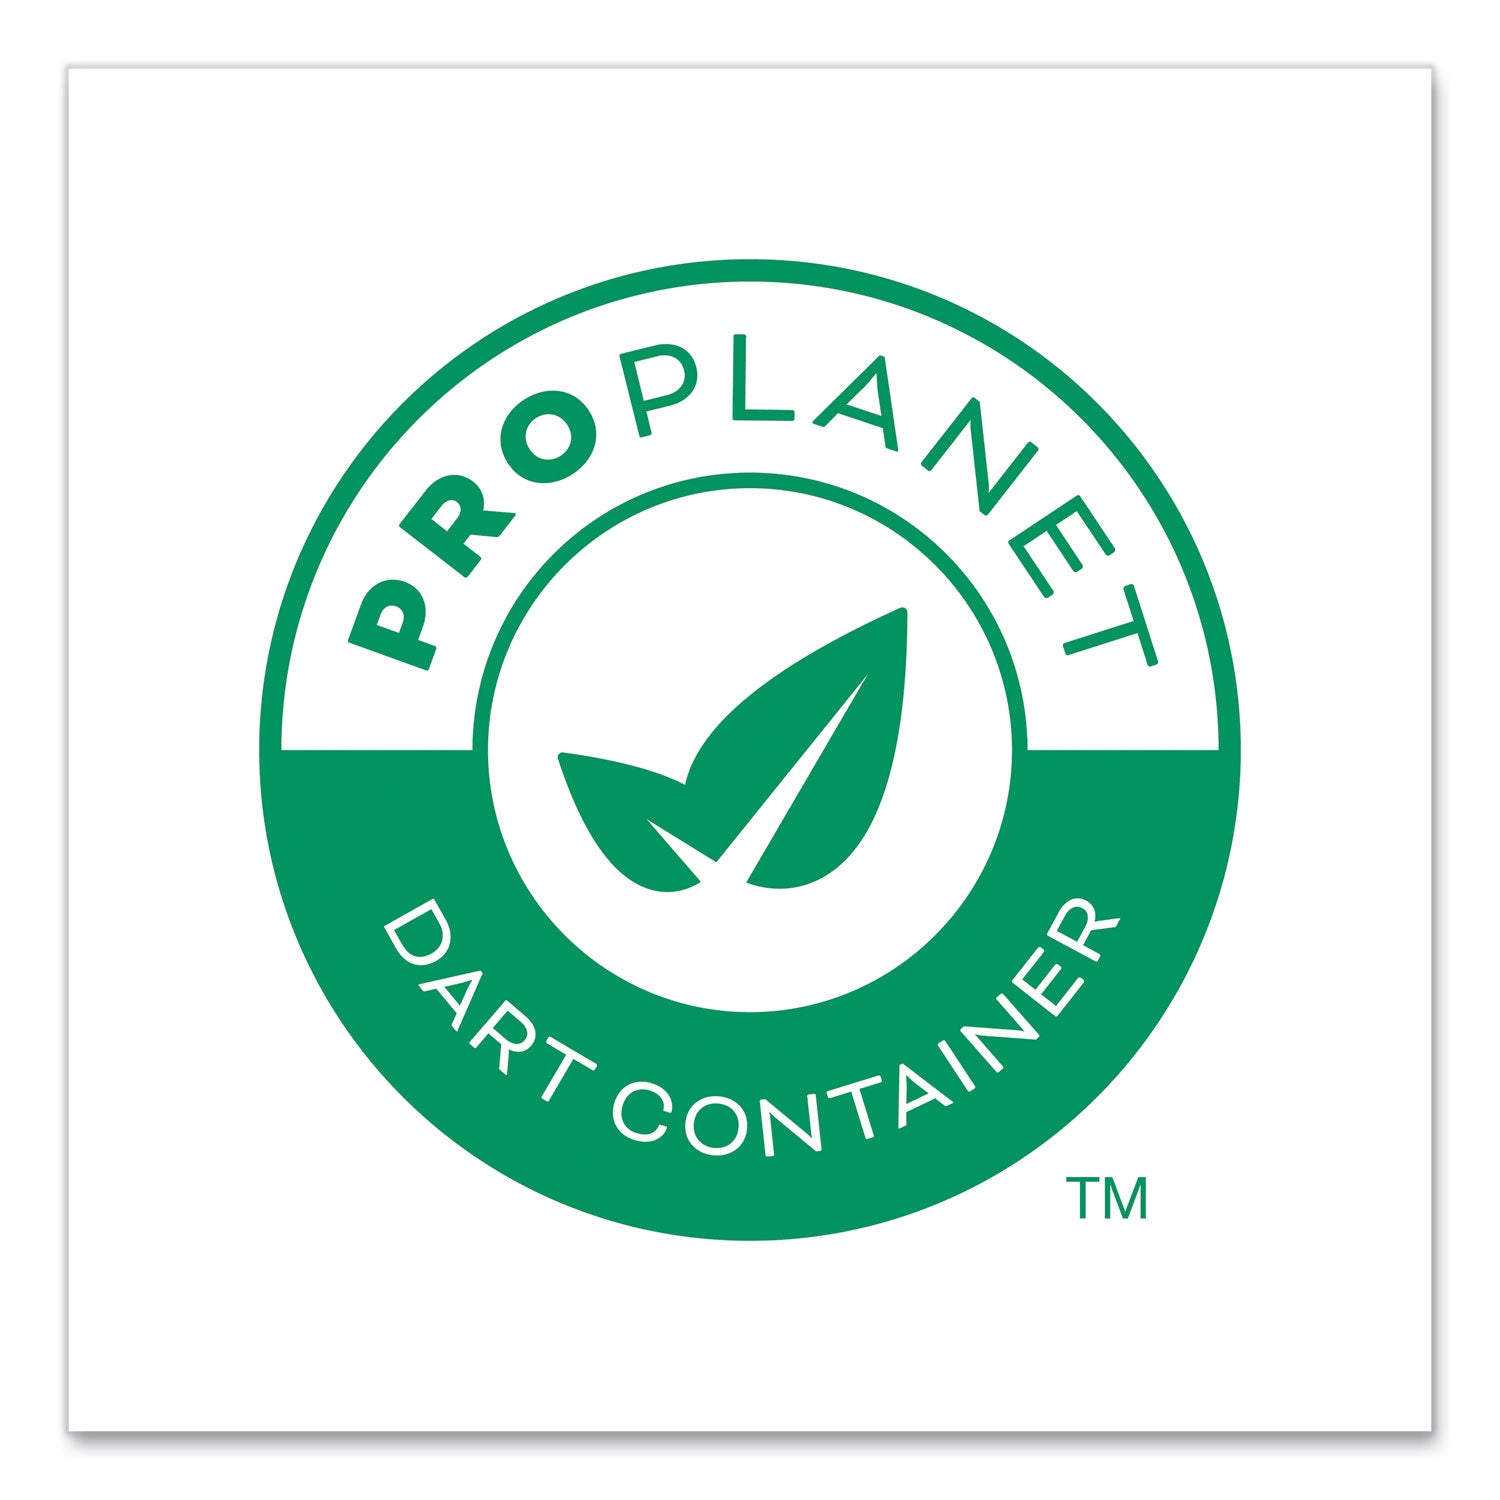 bare-eco-forward-clay-coated-mediumweight-paper-plate-proplanet-seal-9-dia-white-125-pack-4-packs-carton_sccmwp9b - 2